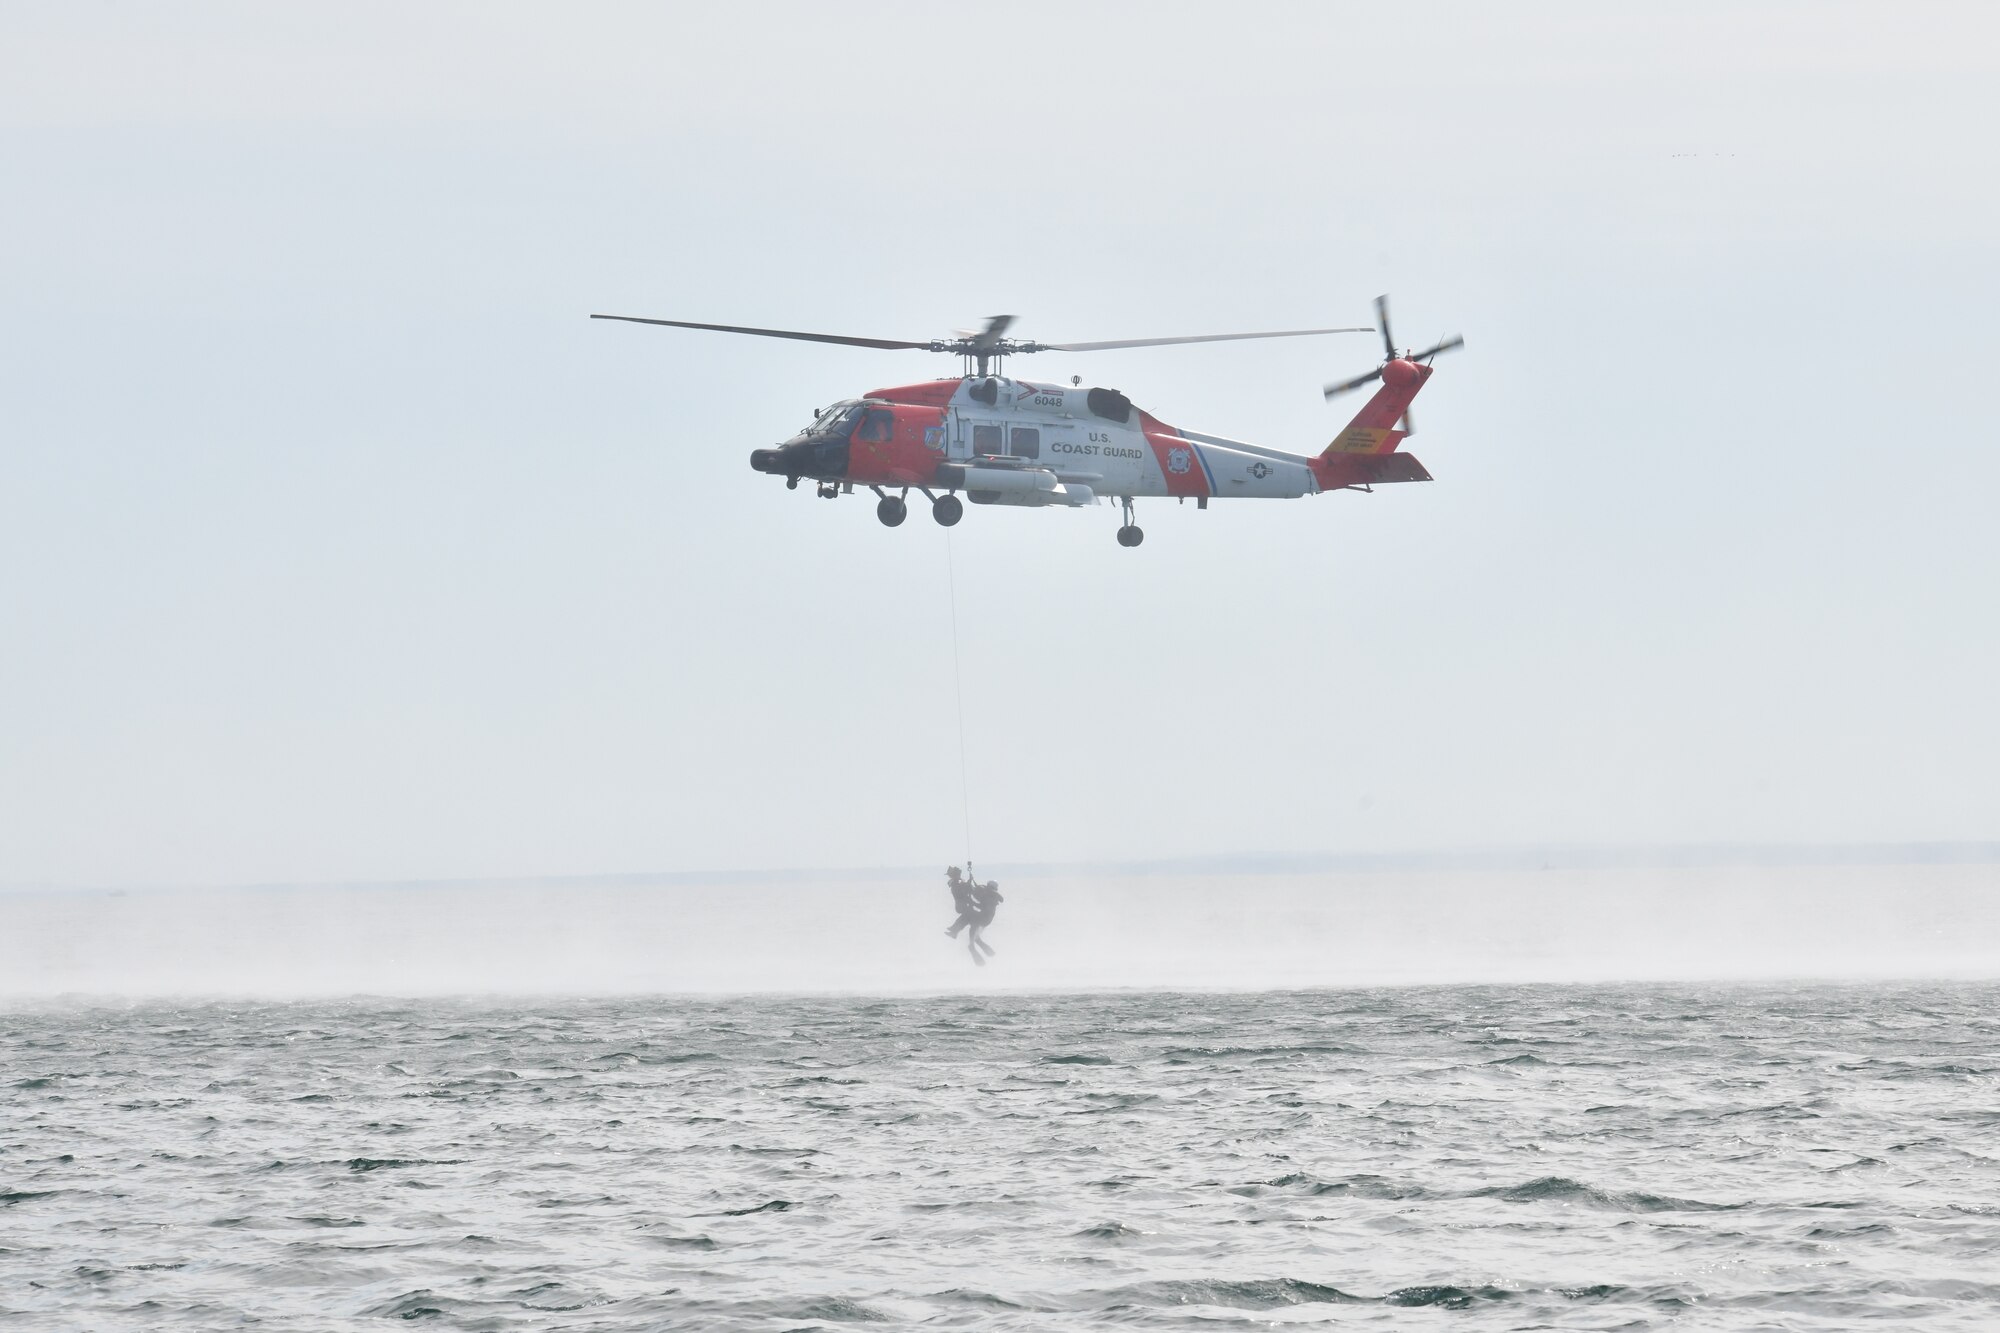 A U.S. Coast Guard MH-60 Jayhawk from Air Station Traverse City, Michigan hoists an F-16 pilot from the 148th Fighter Wing, Minnesota Air National Guard from Lake Superior, near Duluth, Minnesota during a water survival and rescue training mission.